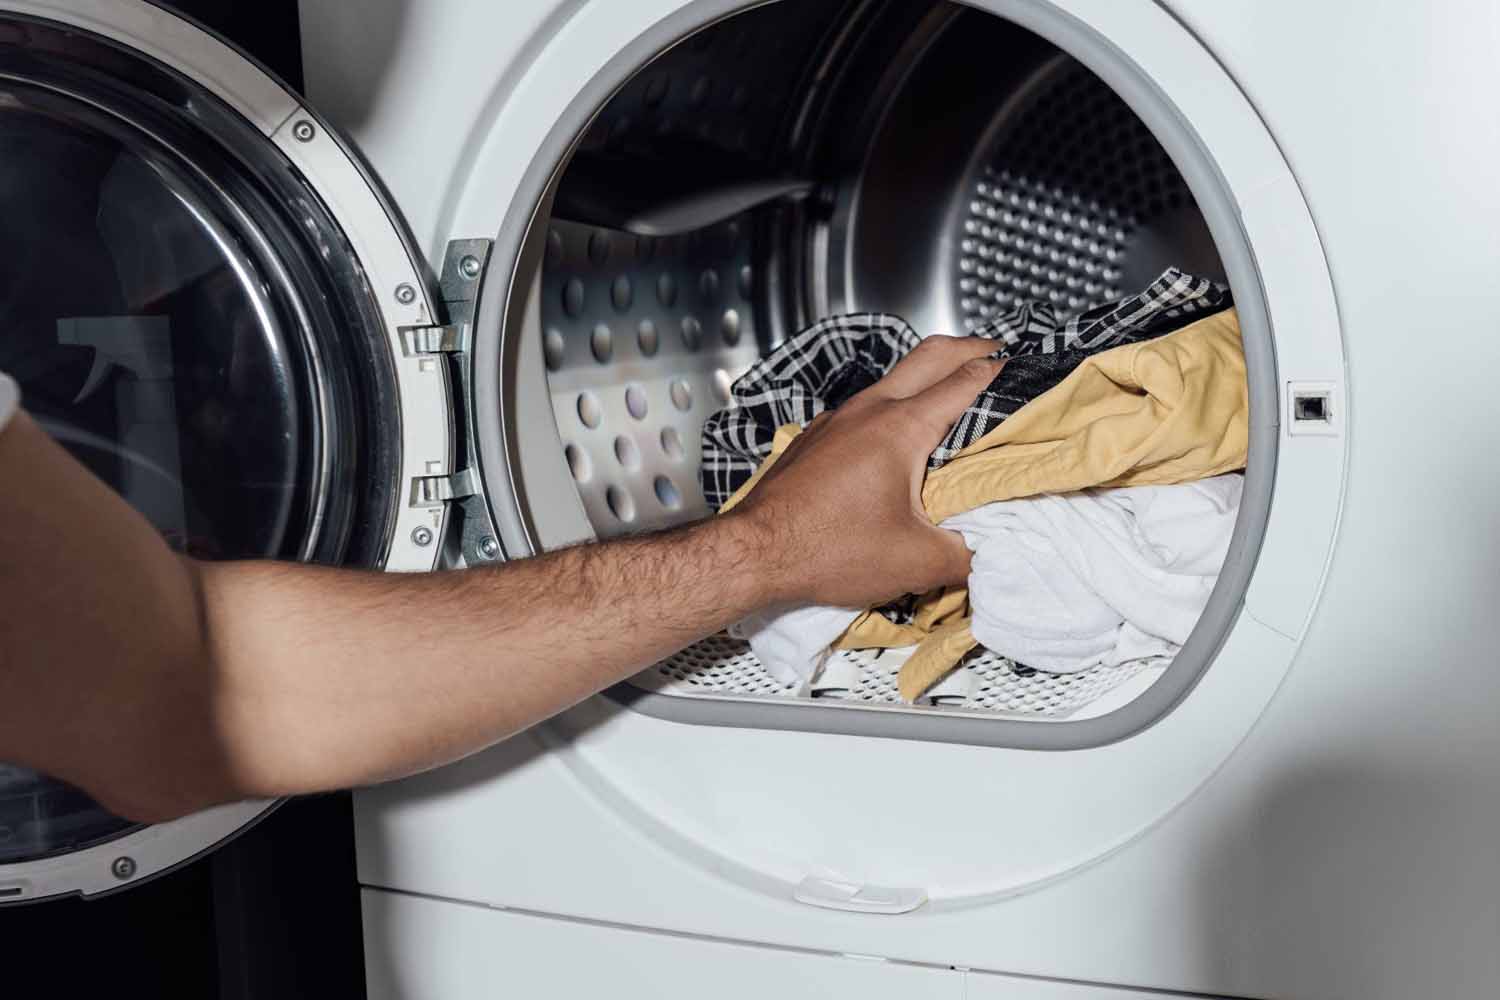 Man washing his clothes once he returned home to kill any bed bugs he brought back from his hotel